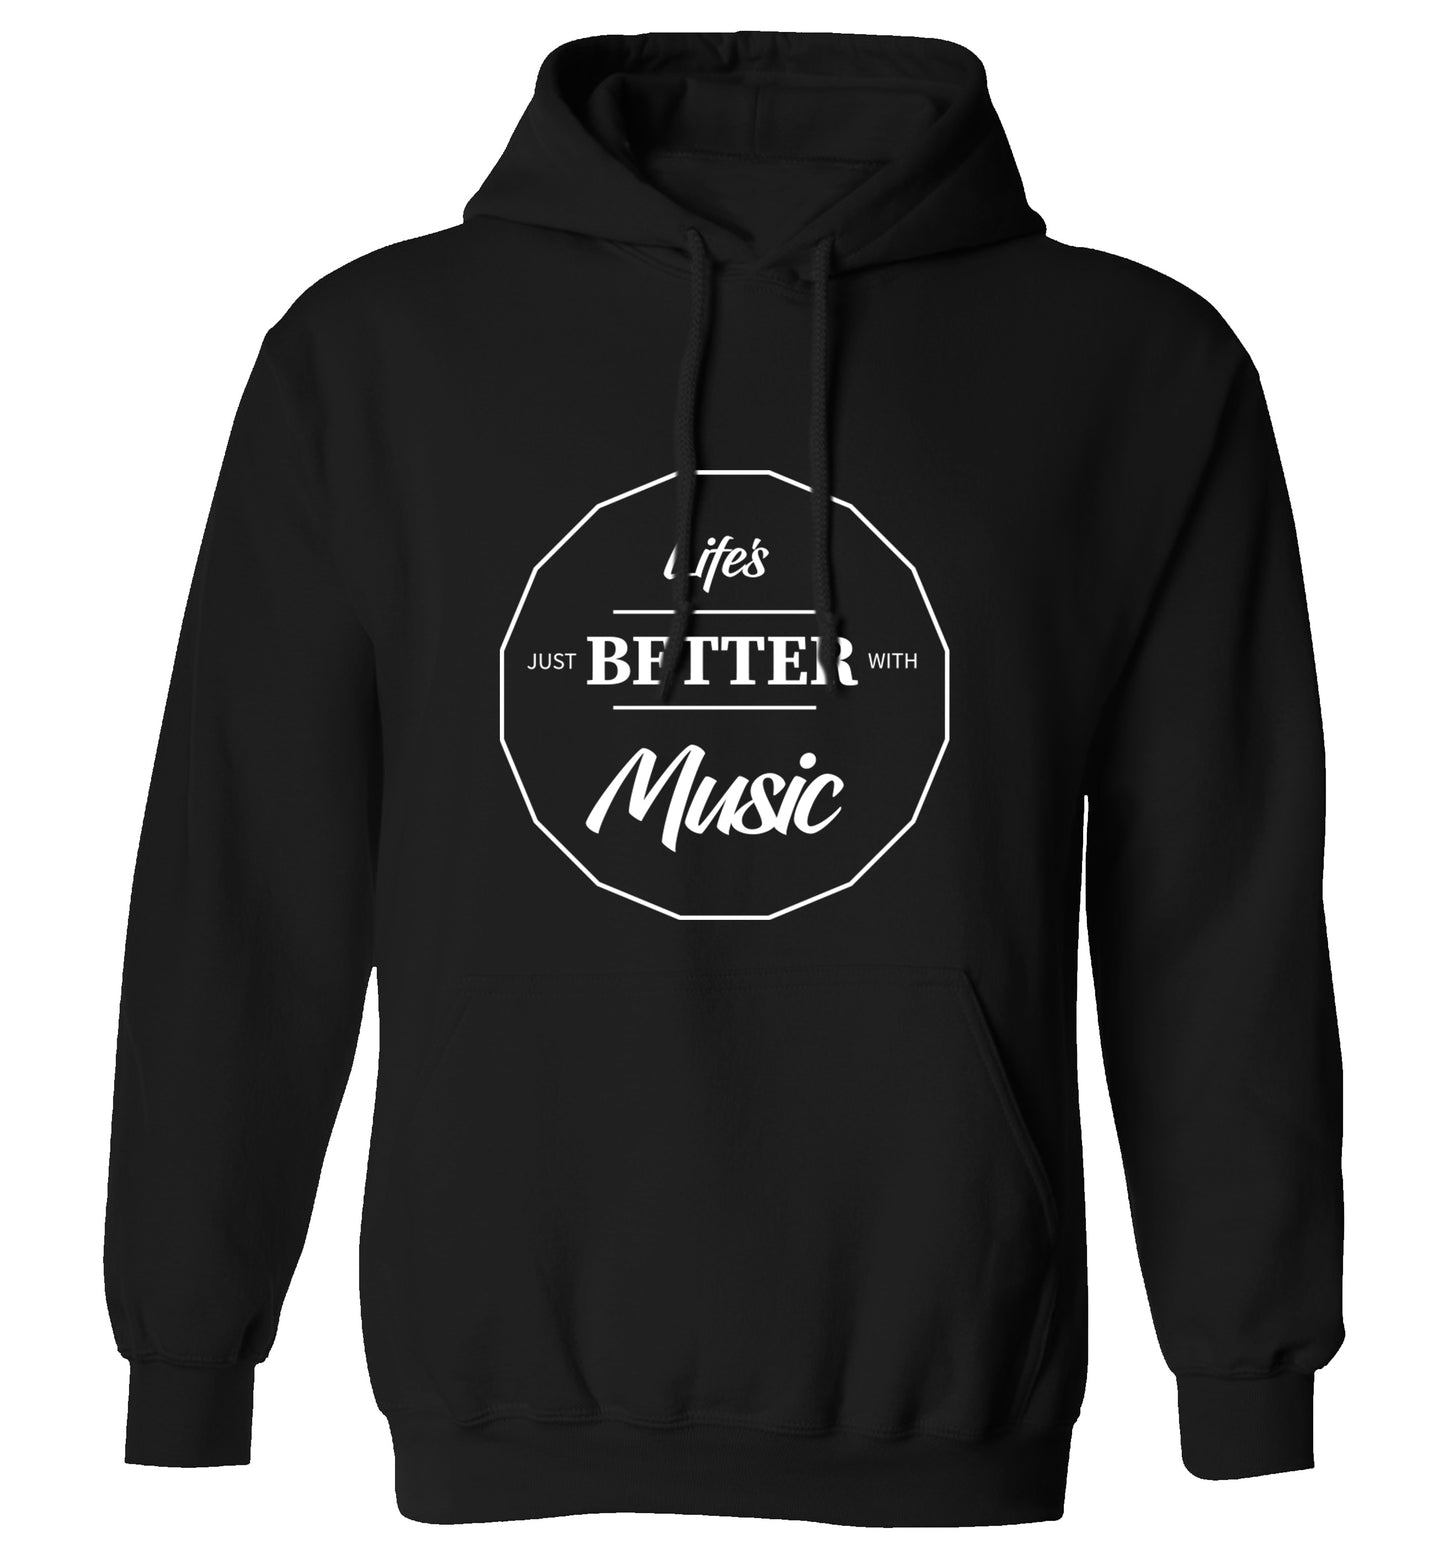 Life is Better With Music adults unisex black hoodie 2XL